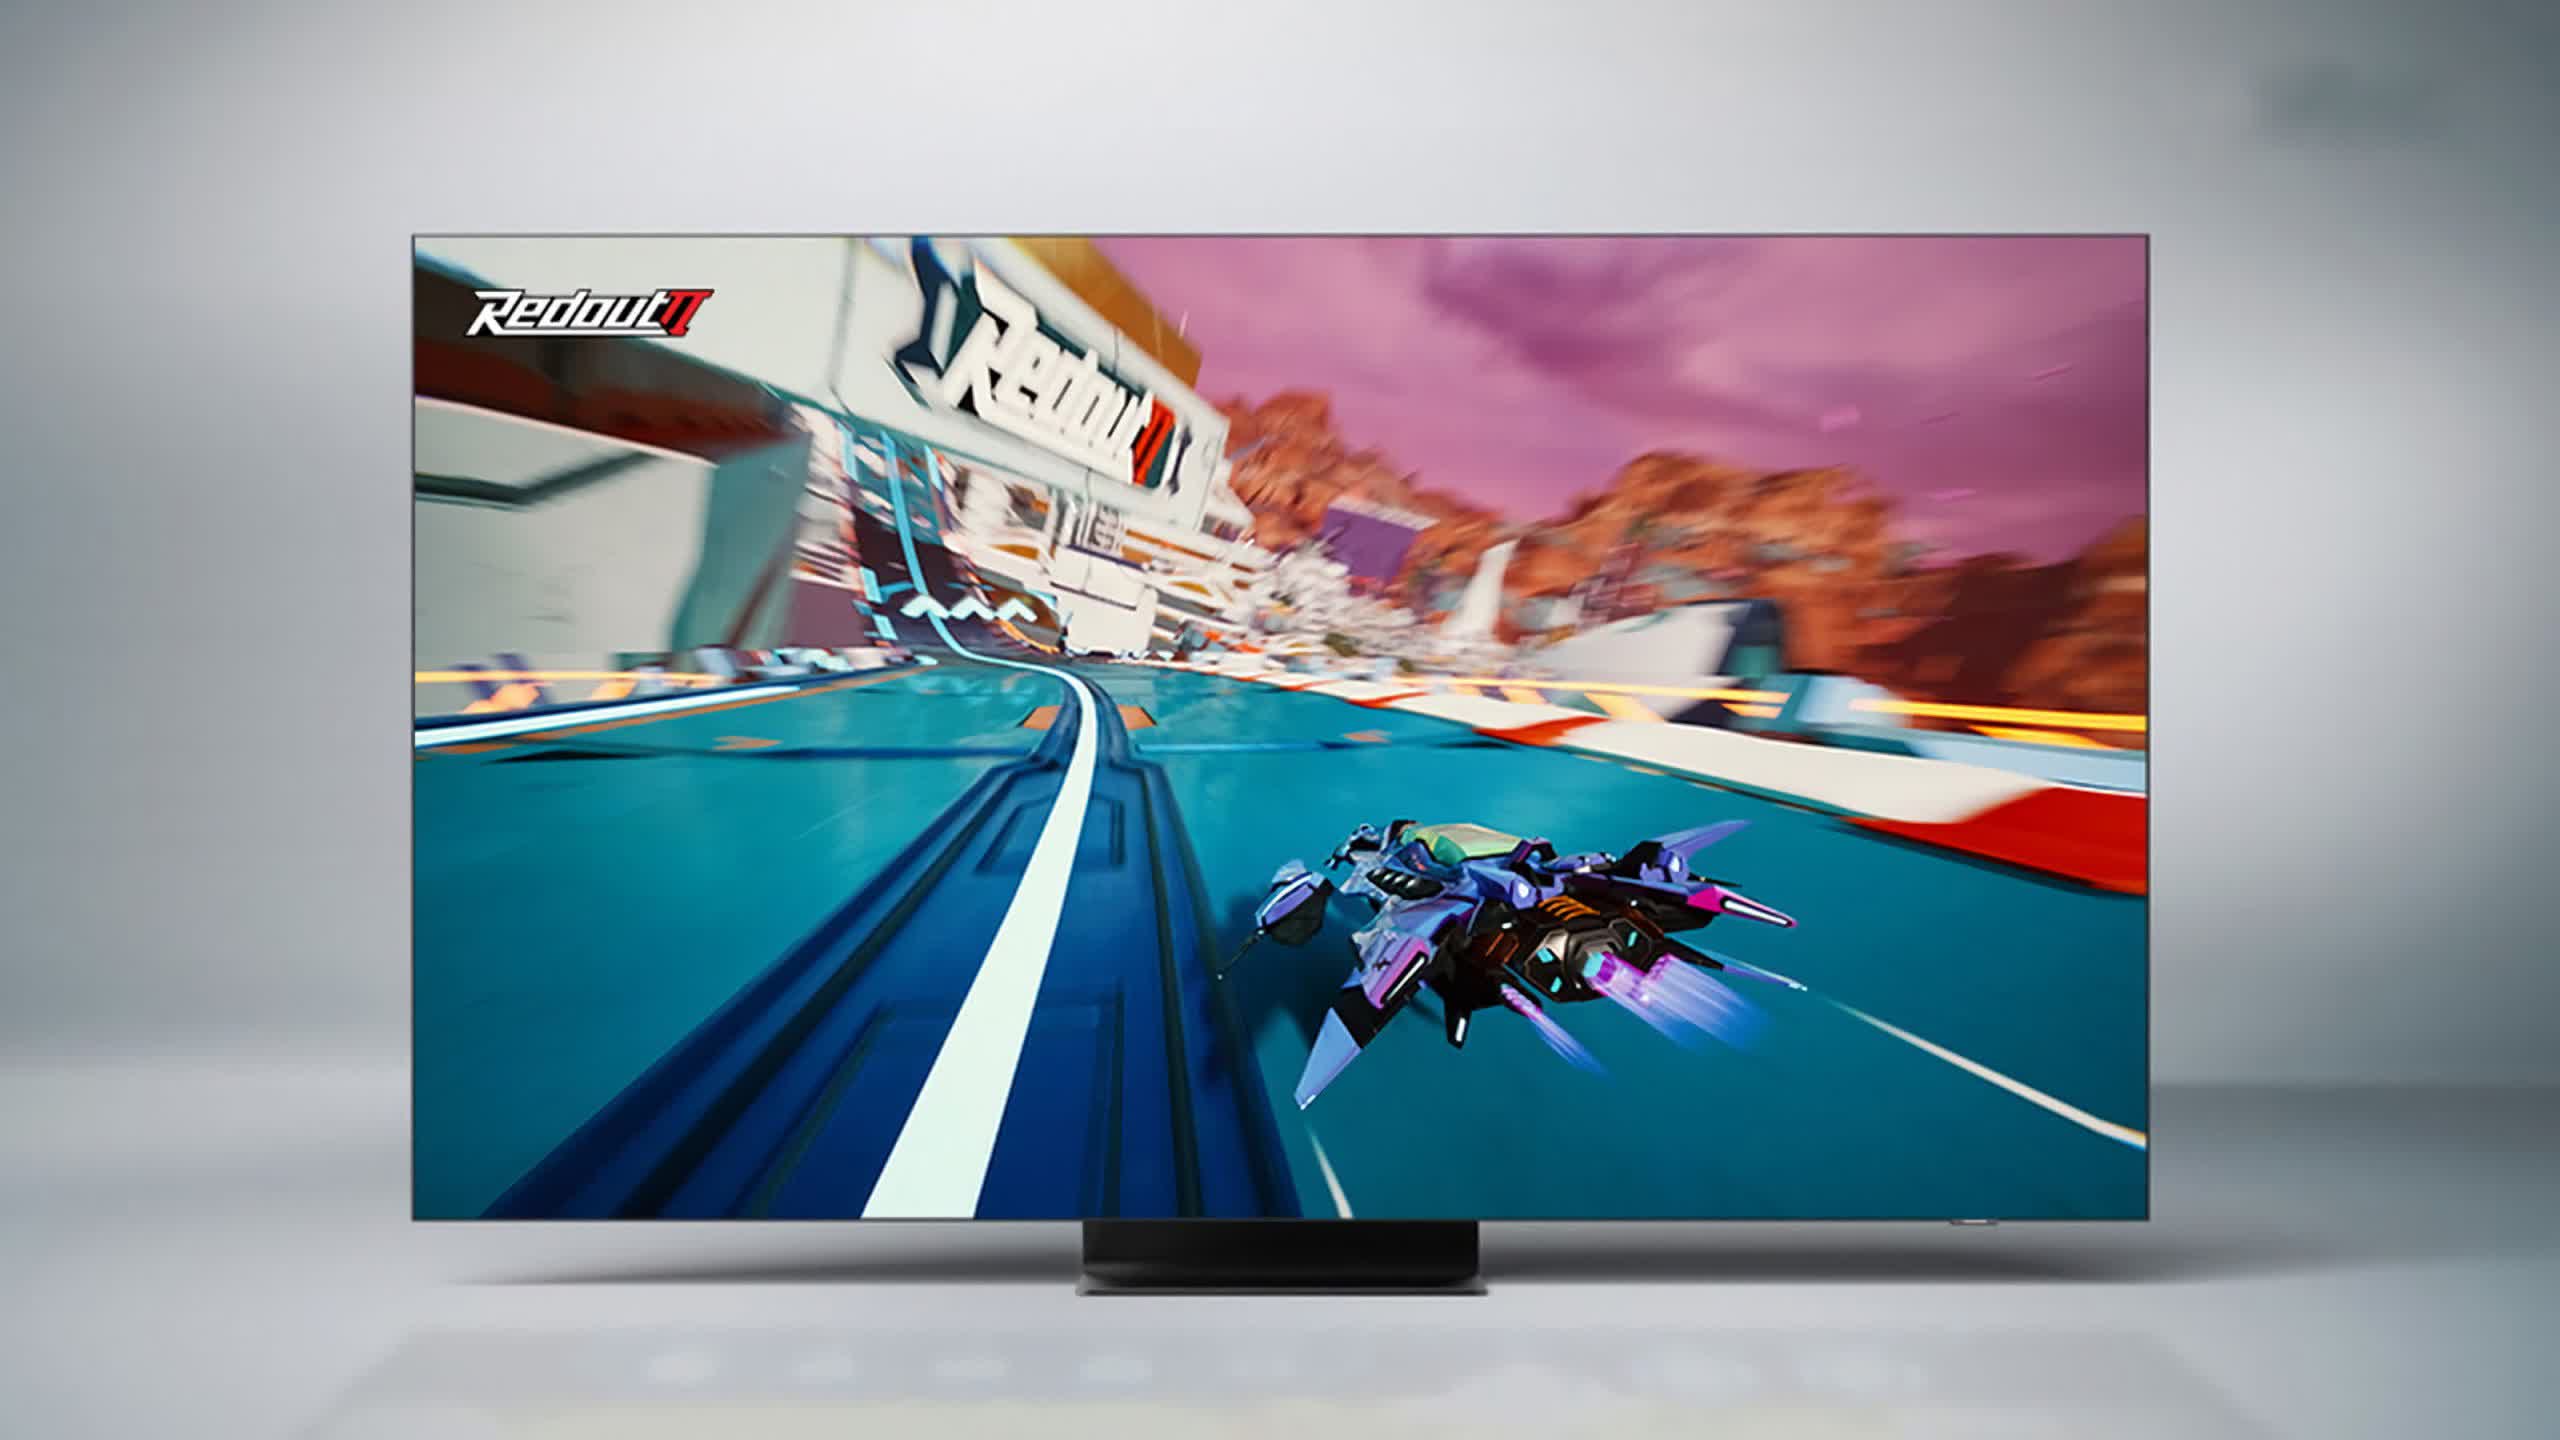 Samsung 2022 TVs feature a gaming hub that supports Stadia, GeForce Now and consoles thumbnail